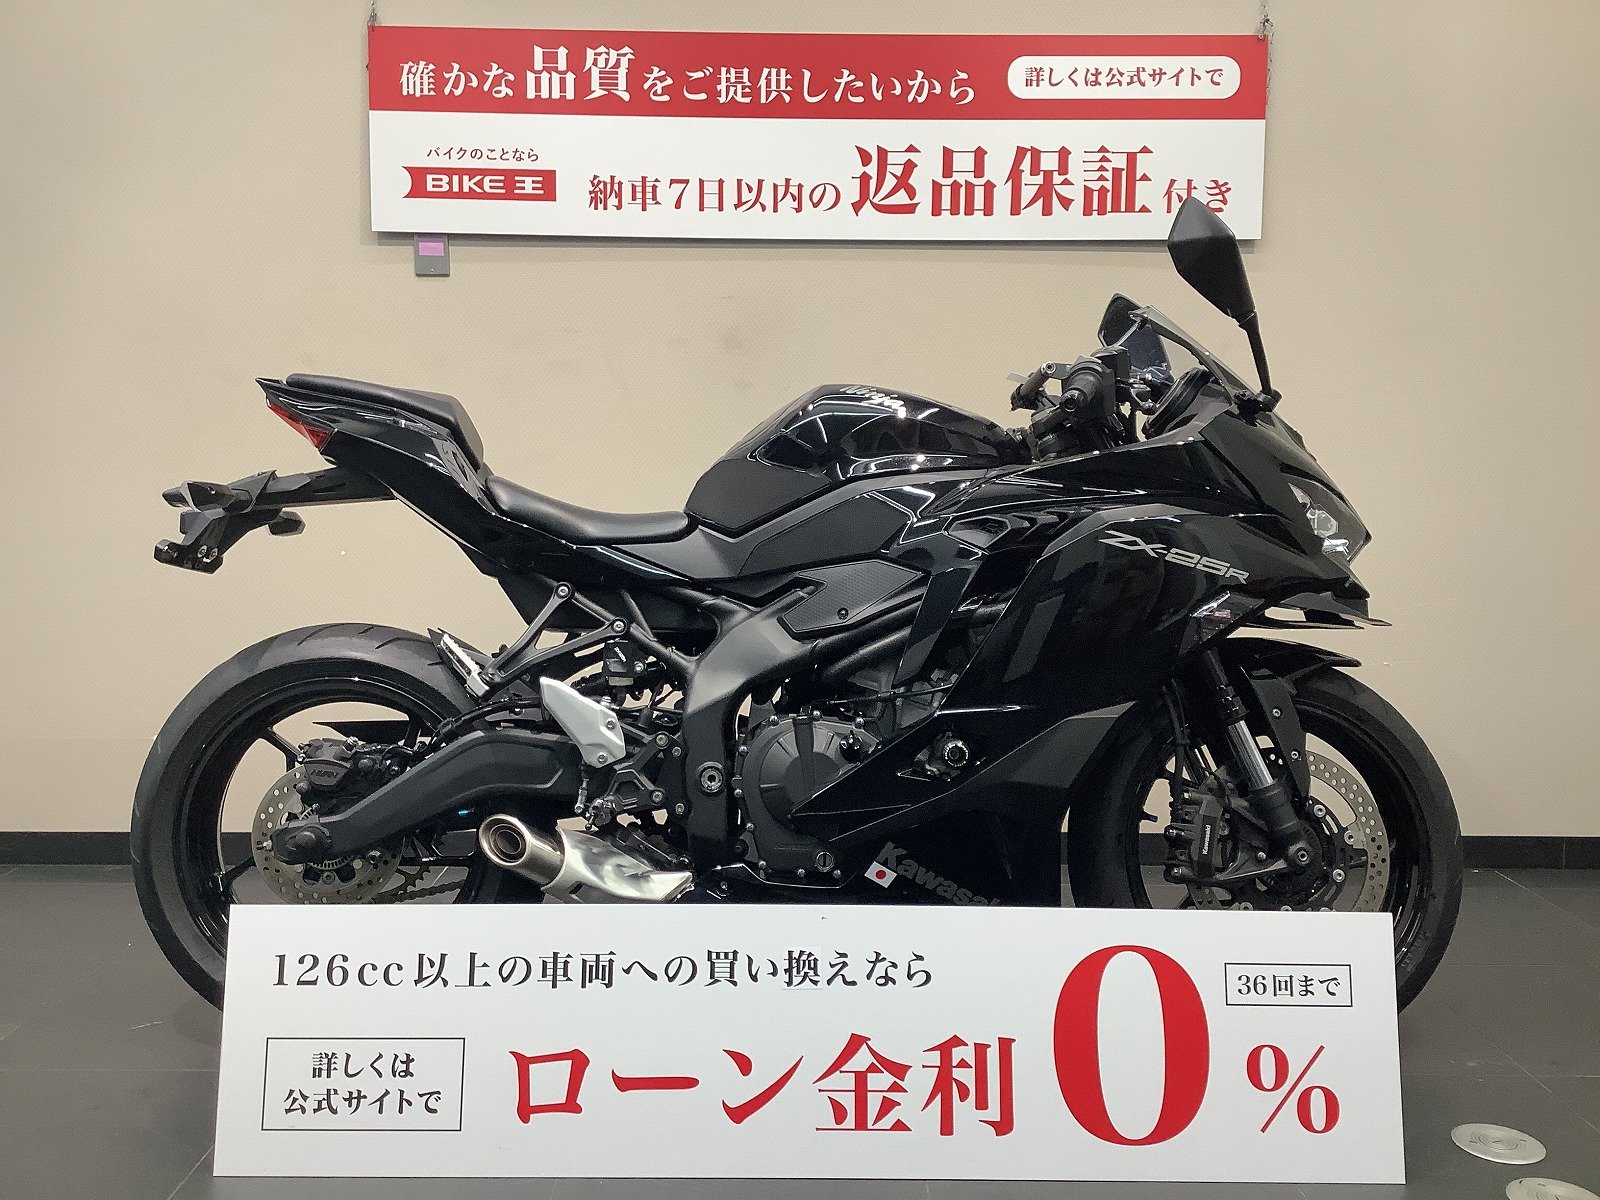 ZX-25R ABS/ｼﾌﾄｲﾝｼﾞｹｰﾀｰ標準 ｸｲｯｸｼﾌﾀｰ装備 | バイク買うなら【バイク王】